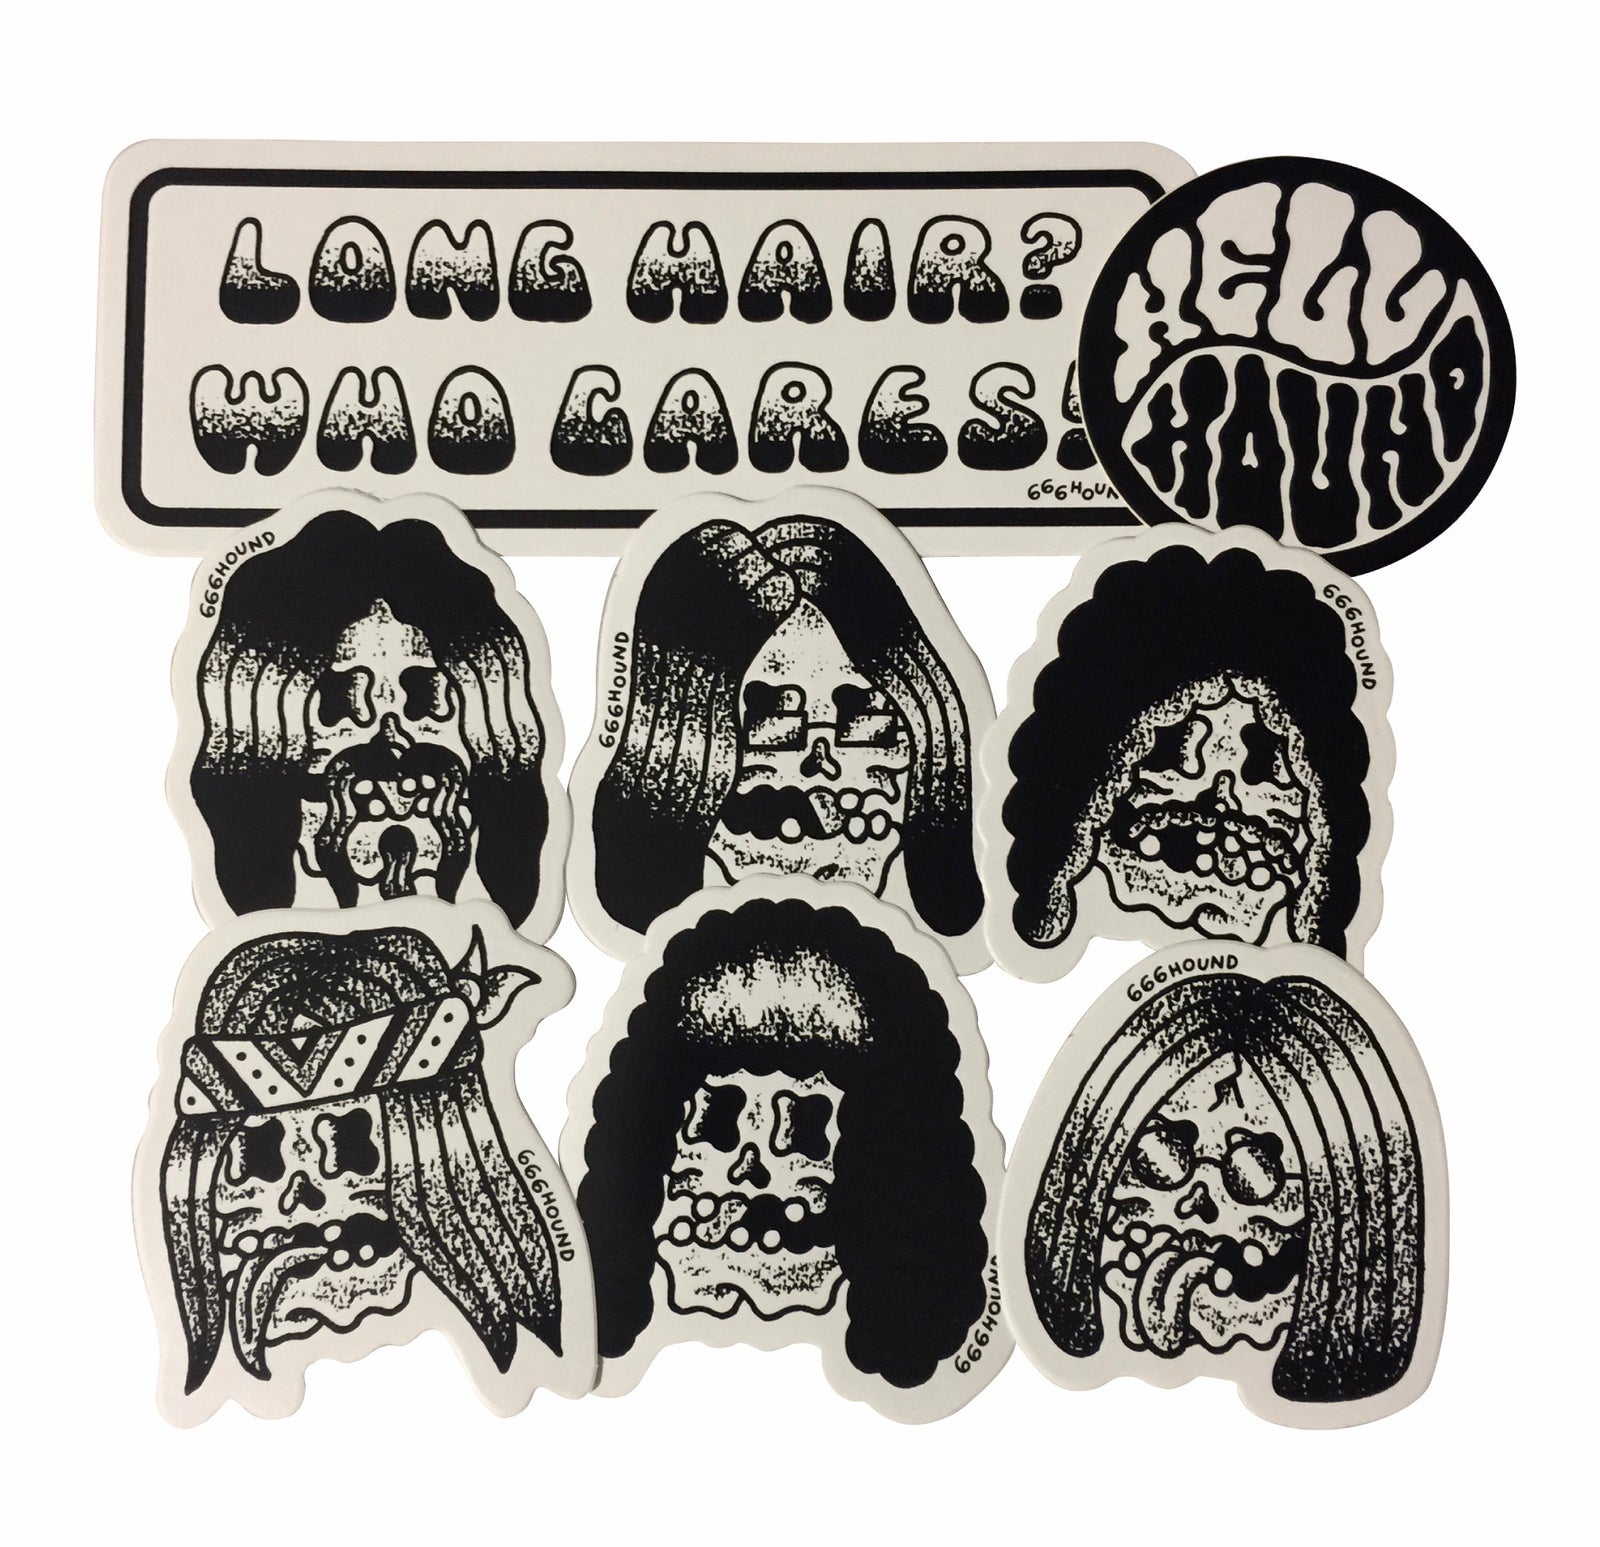 Sticker Pack "Long Hair Who Cares" - Hipnosis